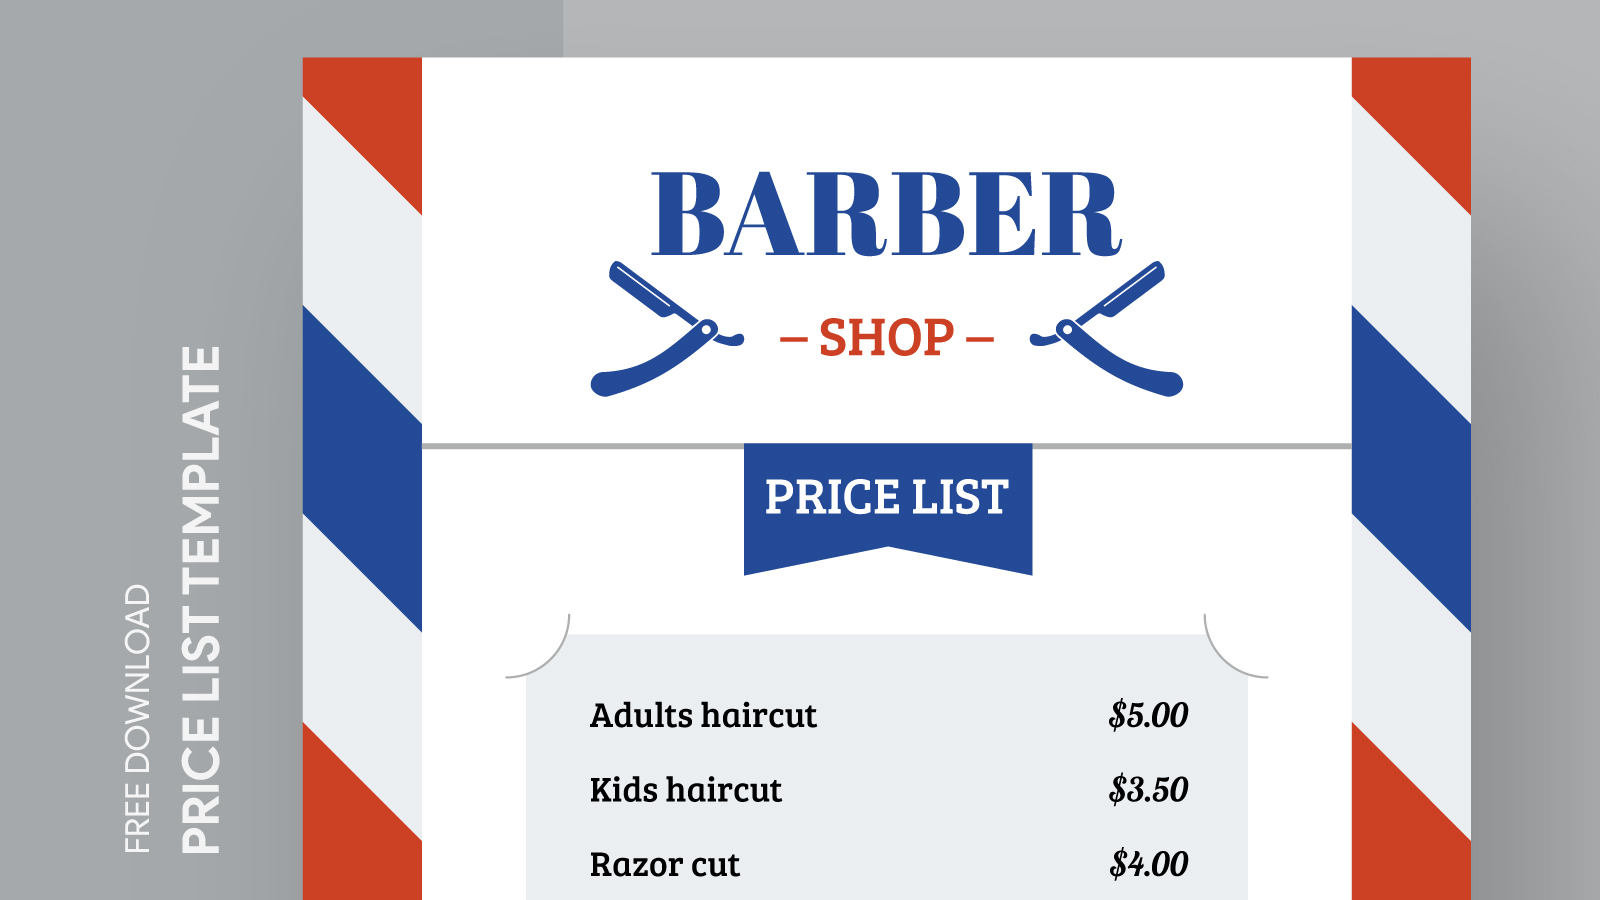 FREE Barber Shop Promotion Template - Download in Word